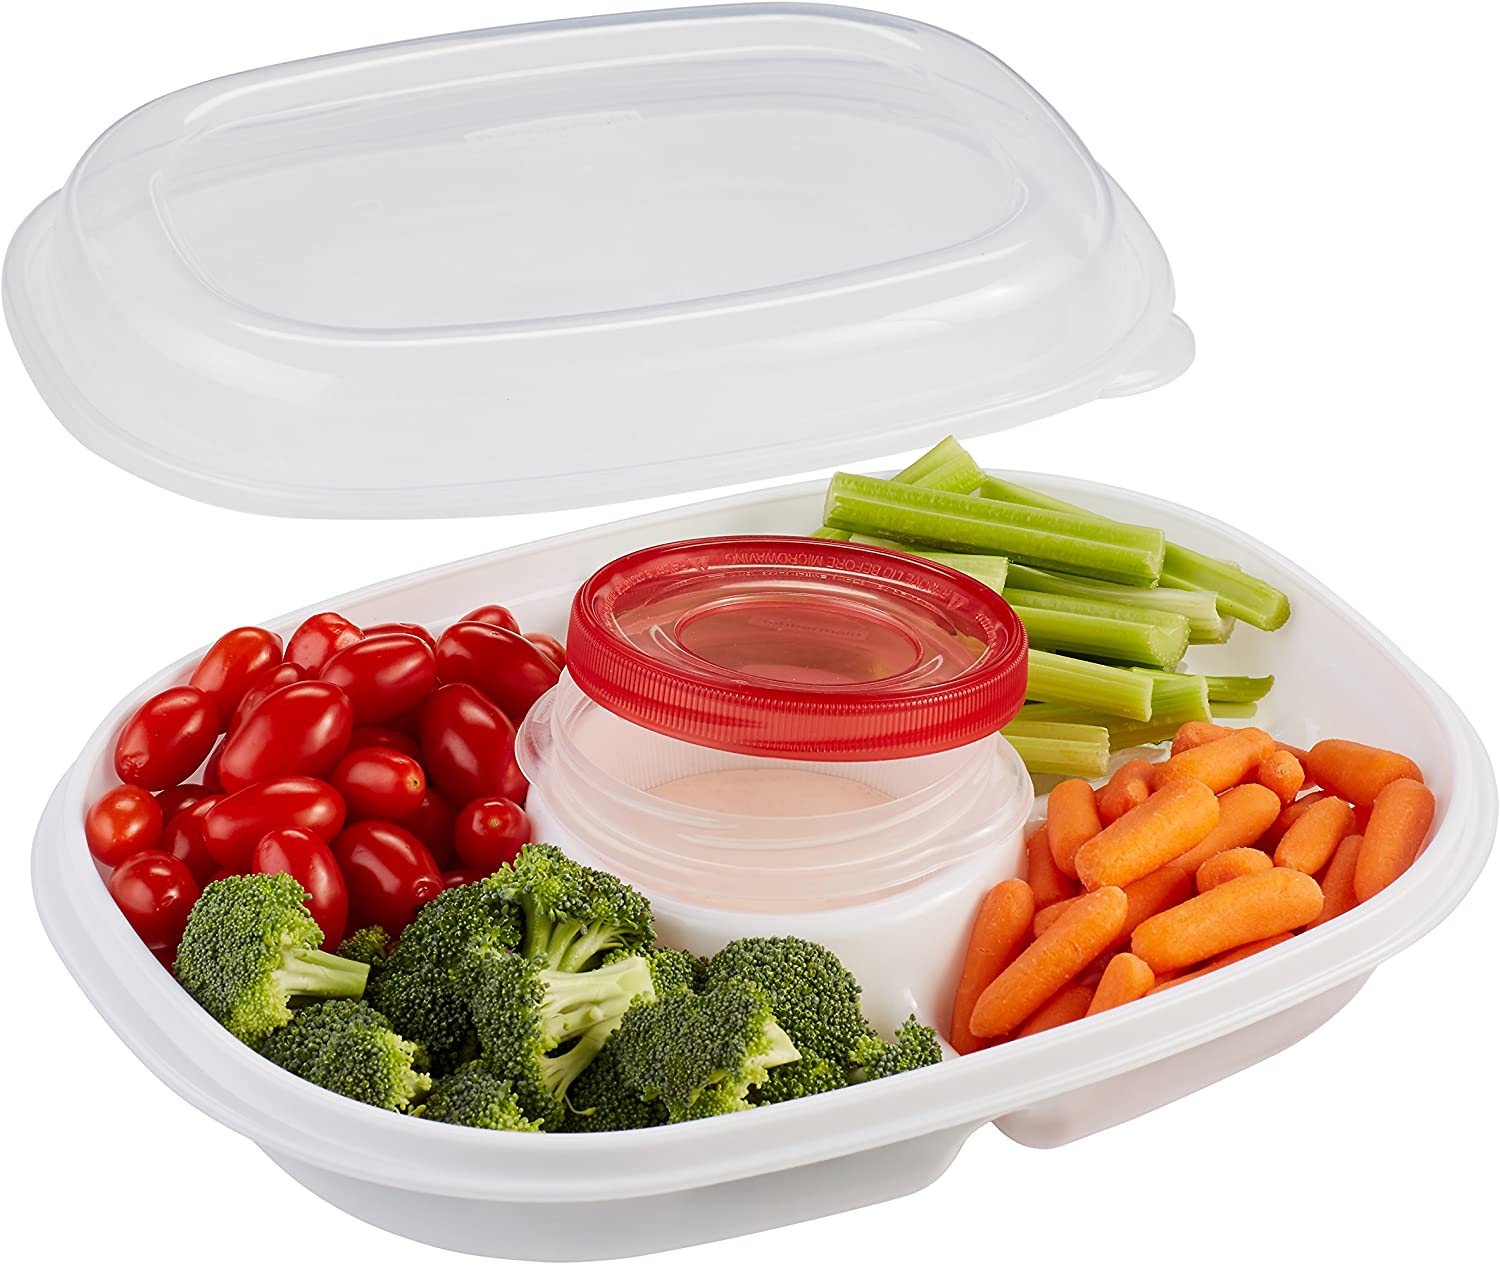 Rubbermaid Dedicated Storage Party Platter, 2.3 L - Whole and All